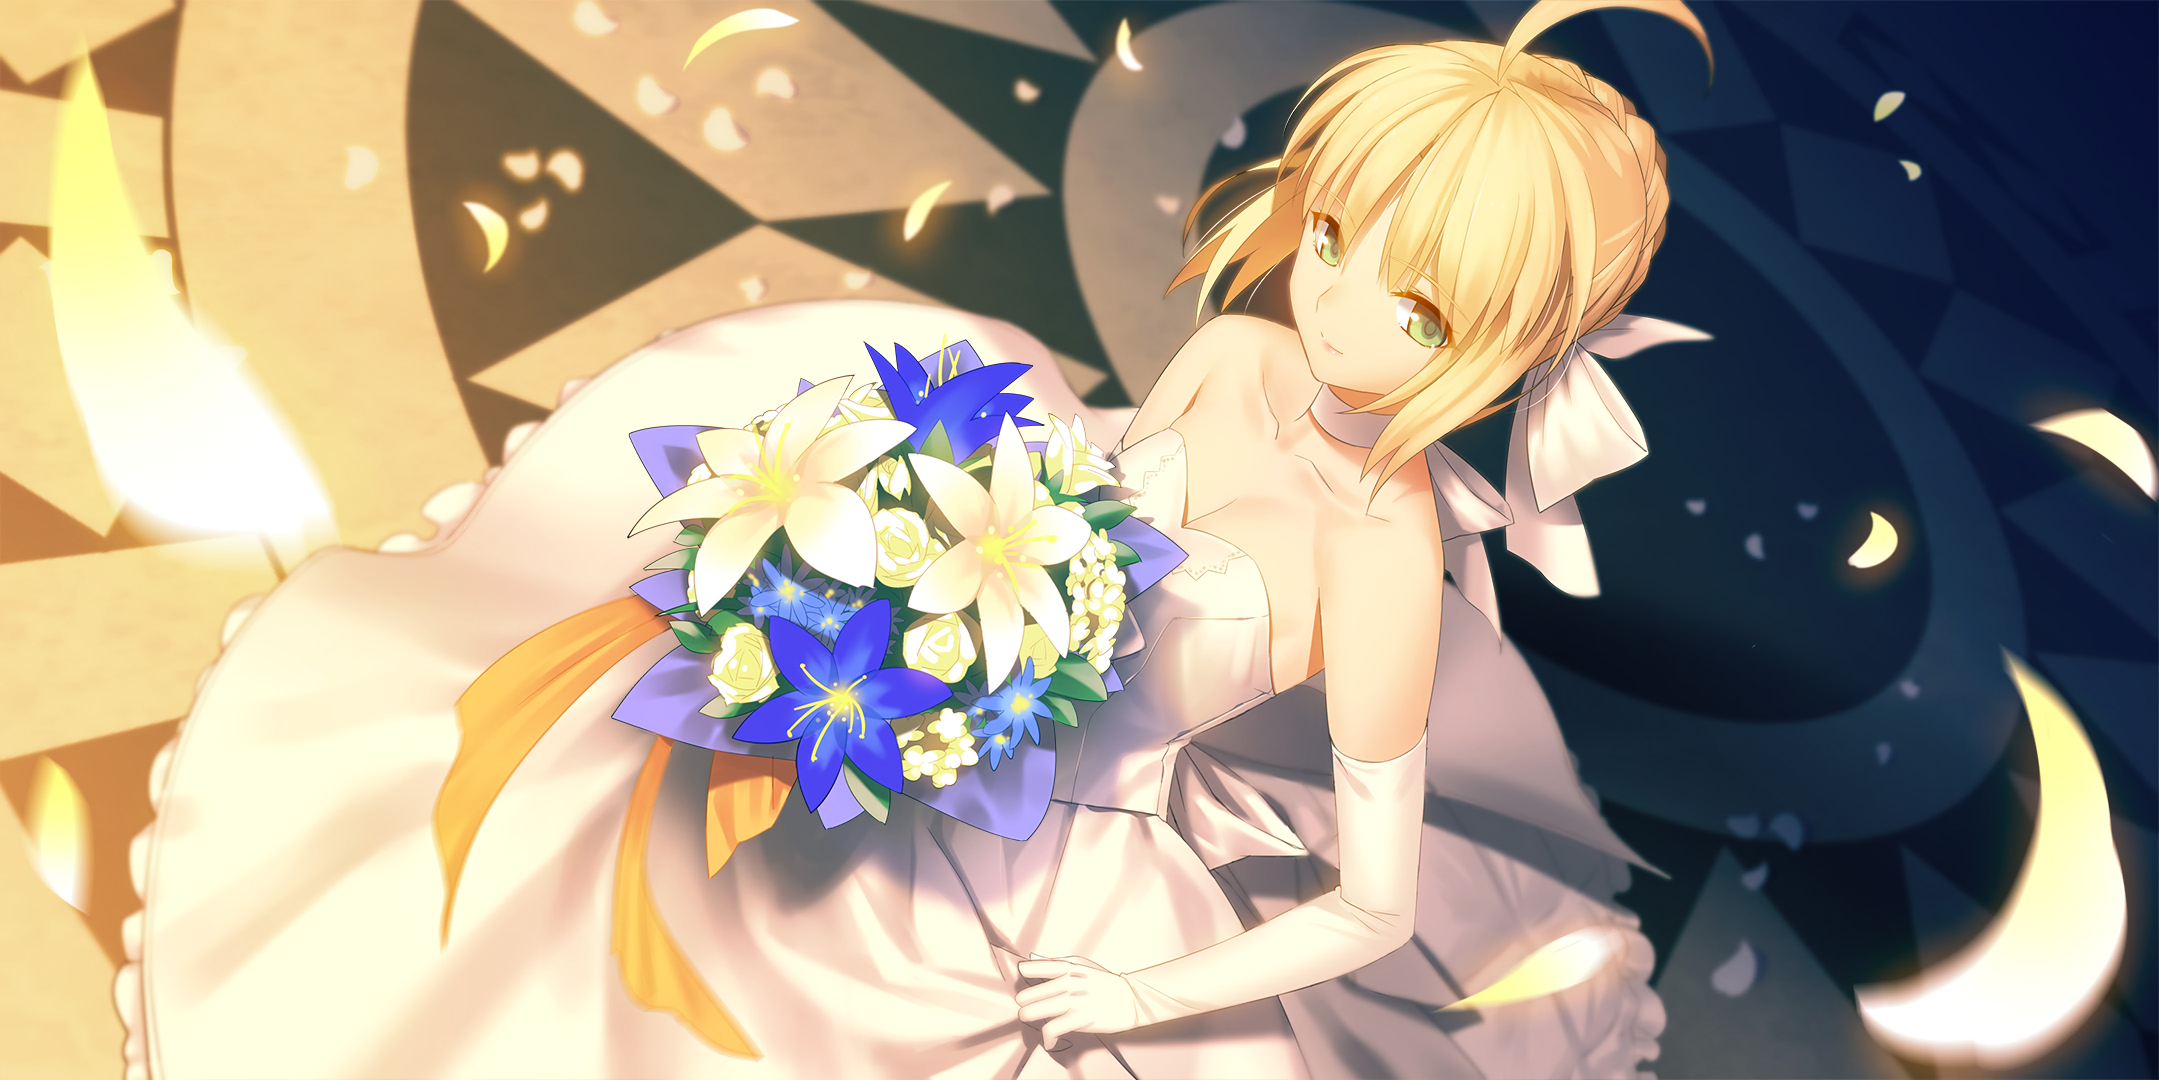 Anime 2159x1080 anime anime girls Fate/Stay Night Saber Fate series blonde choker elbow gloves flowers gloves green eyes wedding dress weddings petals ornamented cleavage